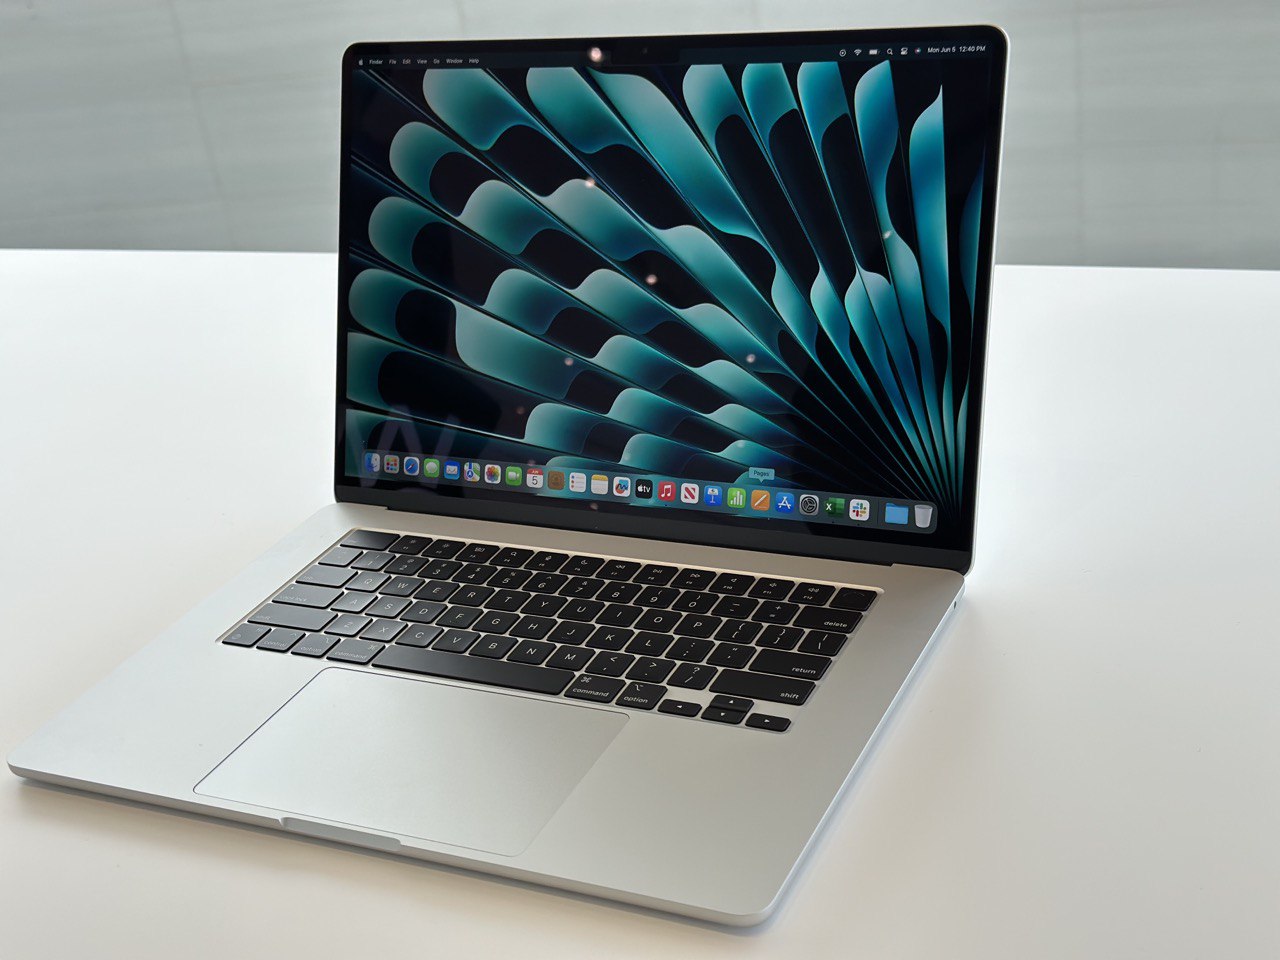 Apple MacBook Air 15-inch preview: Portable power